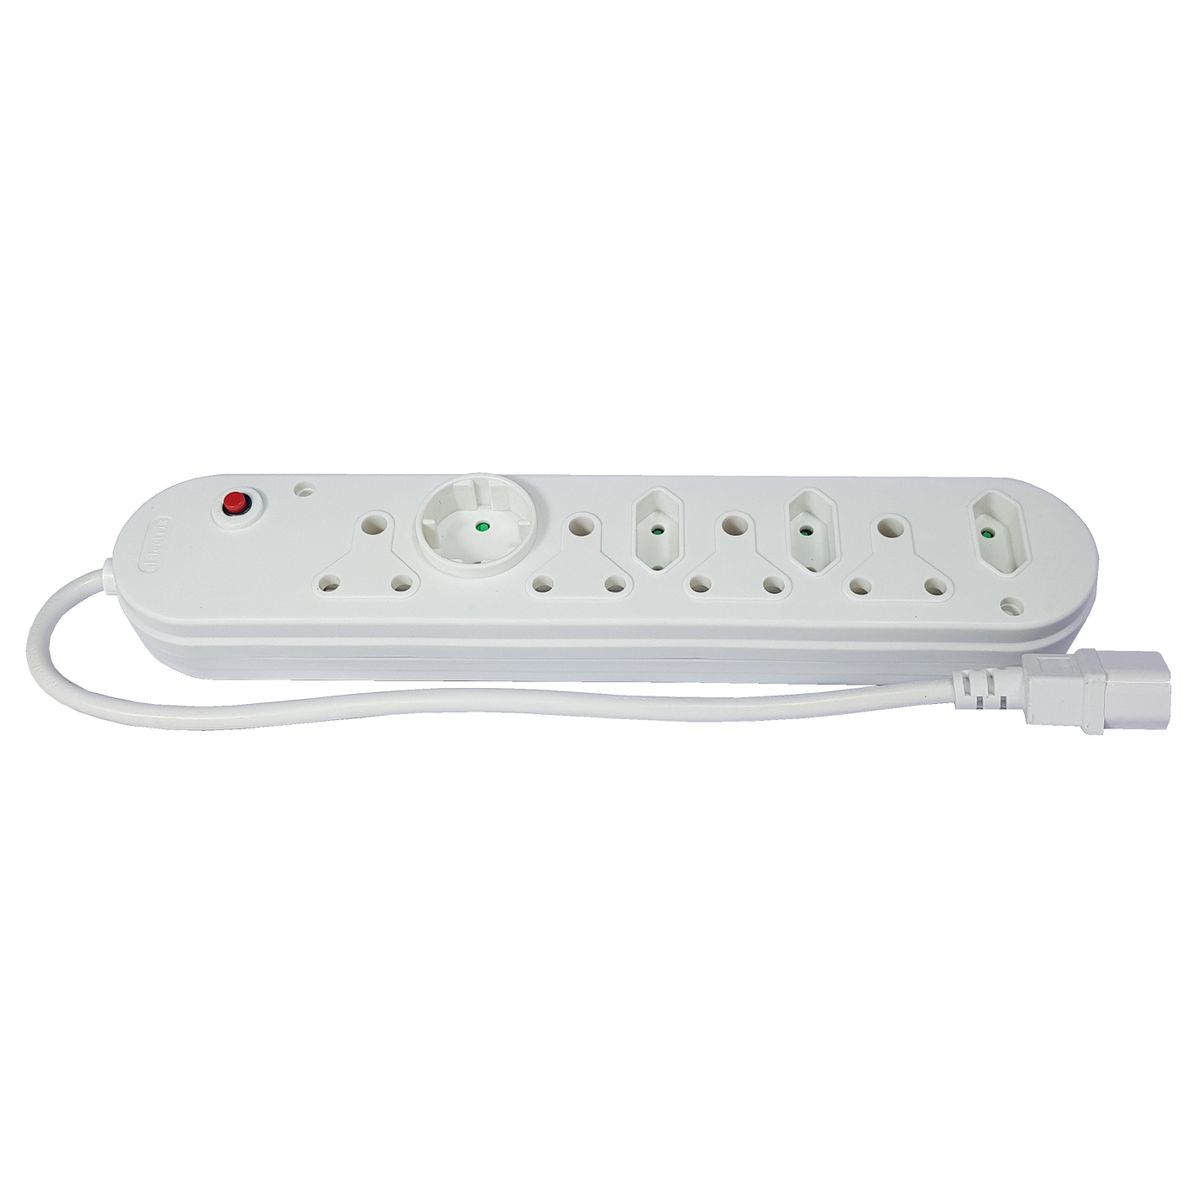 UPS connector: Multiplug with IEC Connector for UPS - 4x16A + 4x5A - White